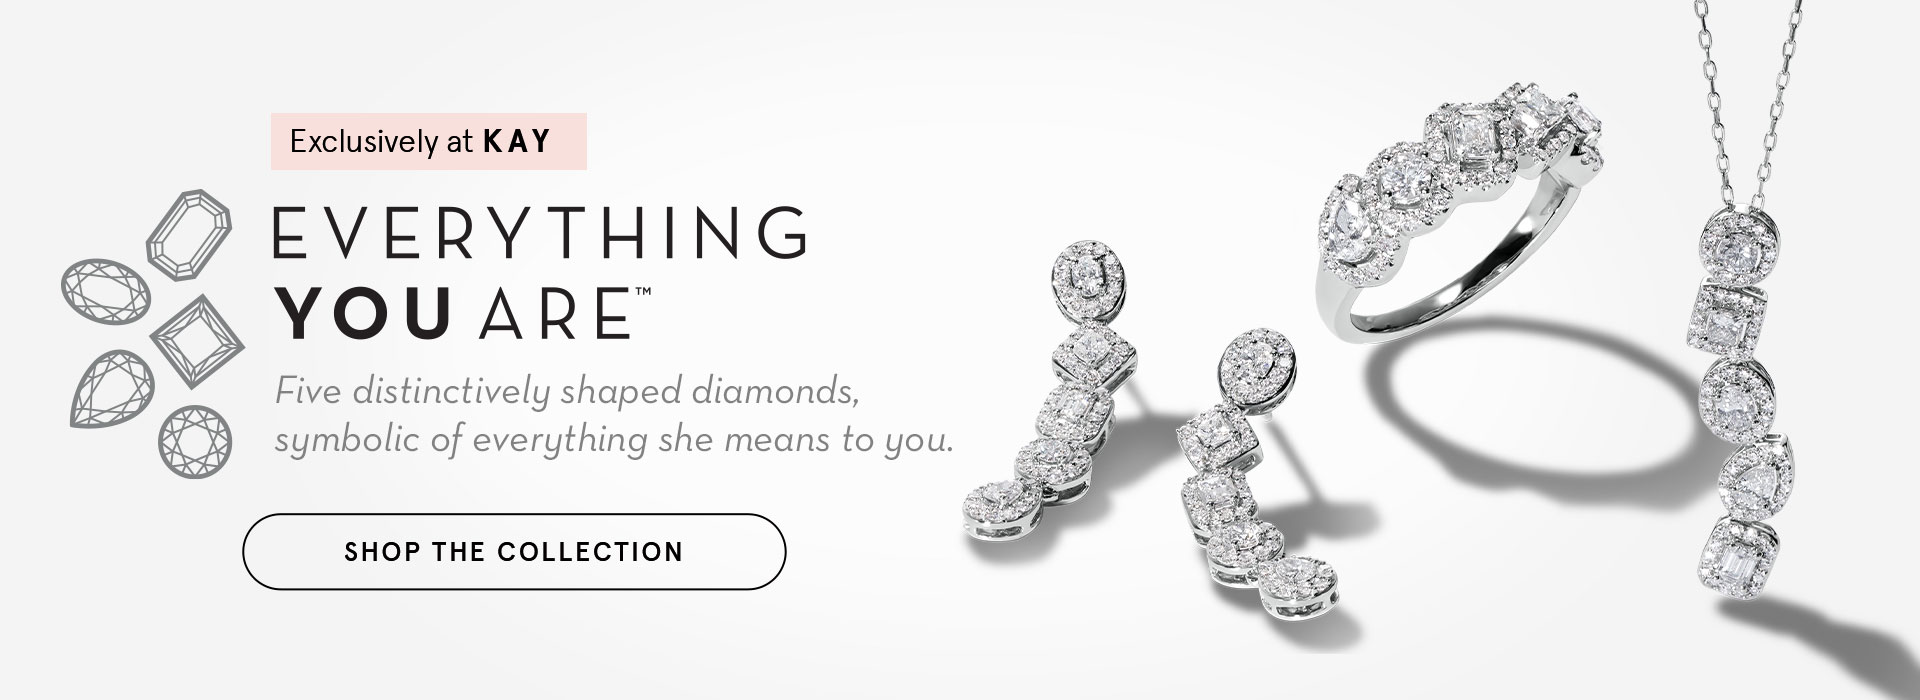 Everything You Are Diamond Ring Collection Kay